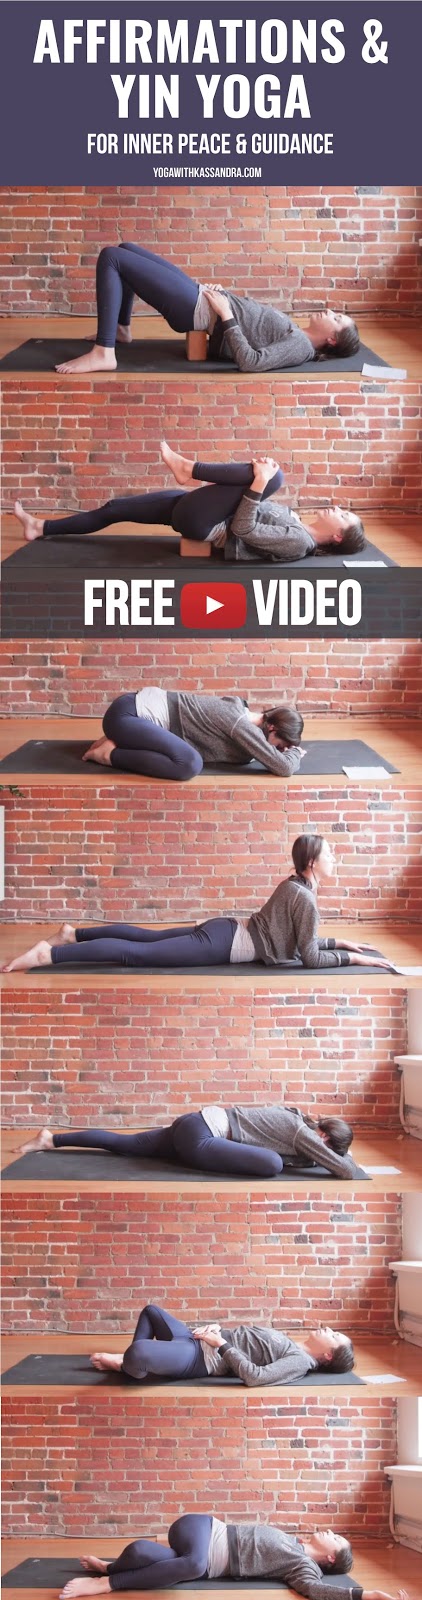 5 Soothing Yoga Poses for Cultivating Inner Calm | Yoga poses, Corpse pose,  Poses